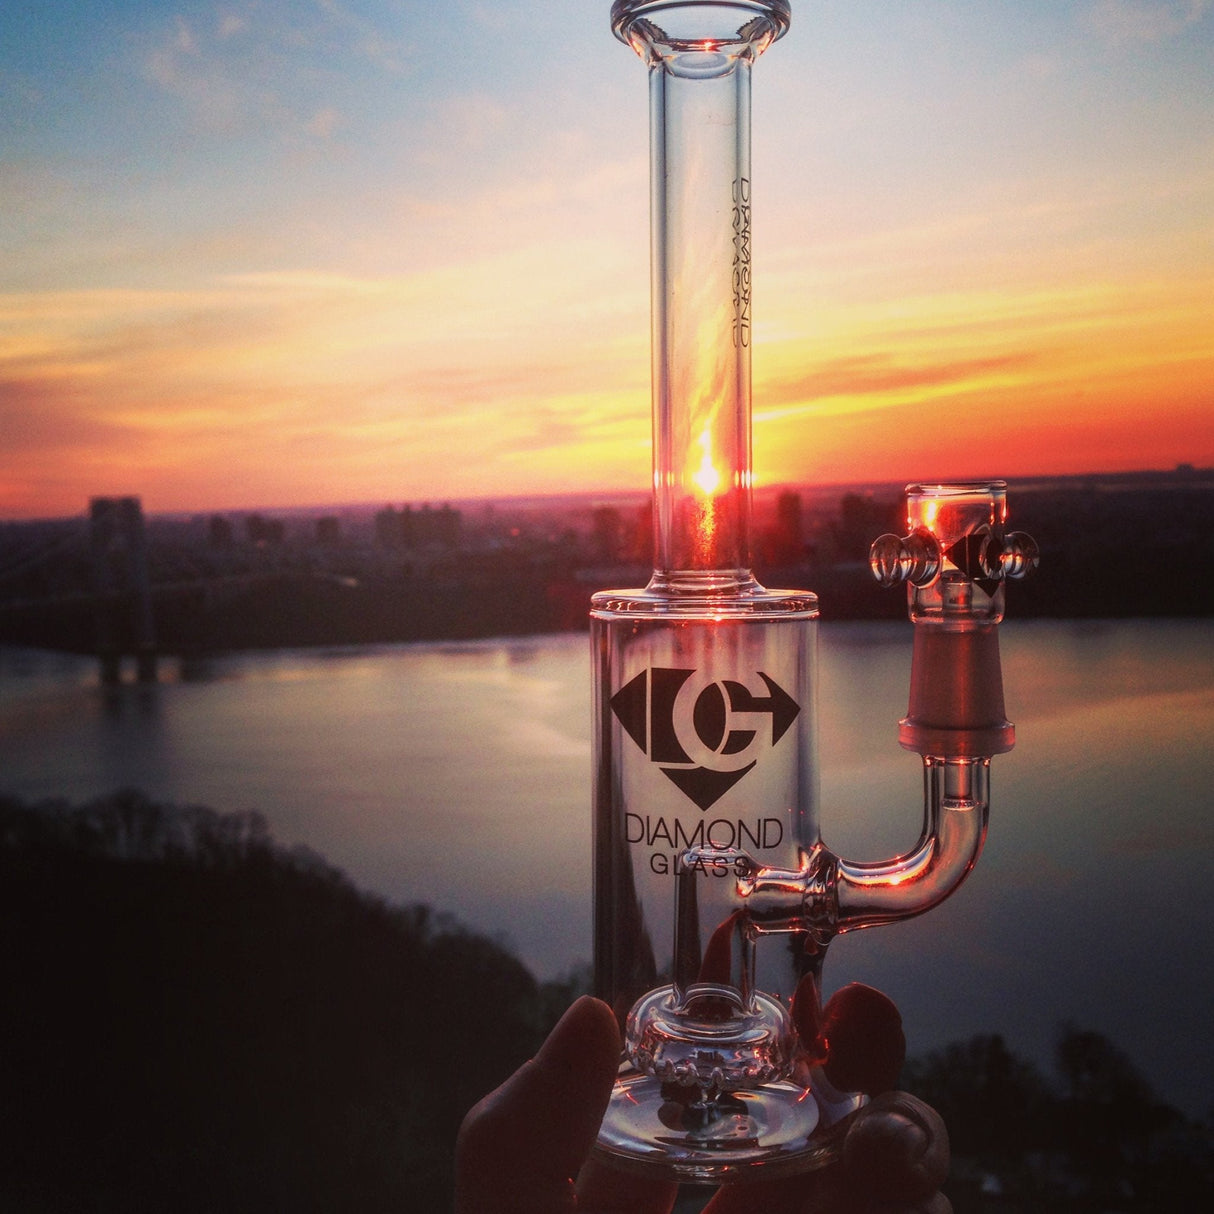 Diamond Glass Showerhead Dab Rig with Sunset Backdrop, held in hand for scale, ideal for concentrates